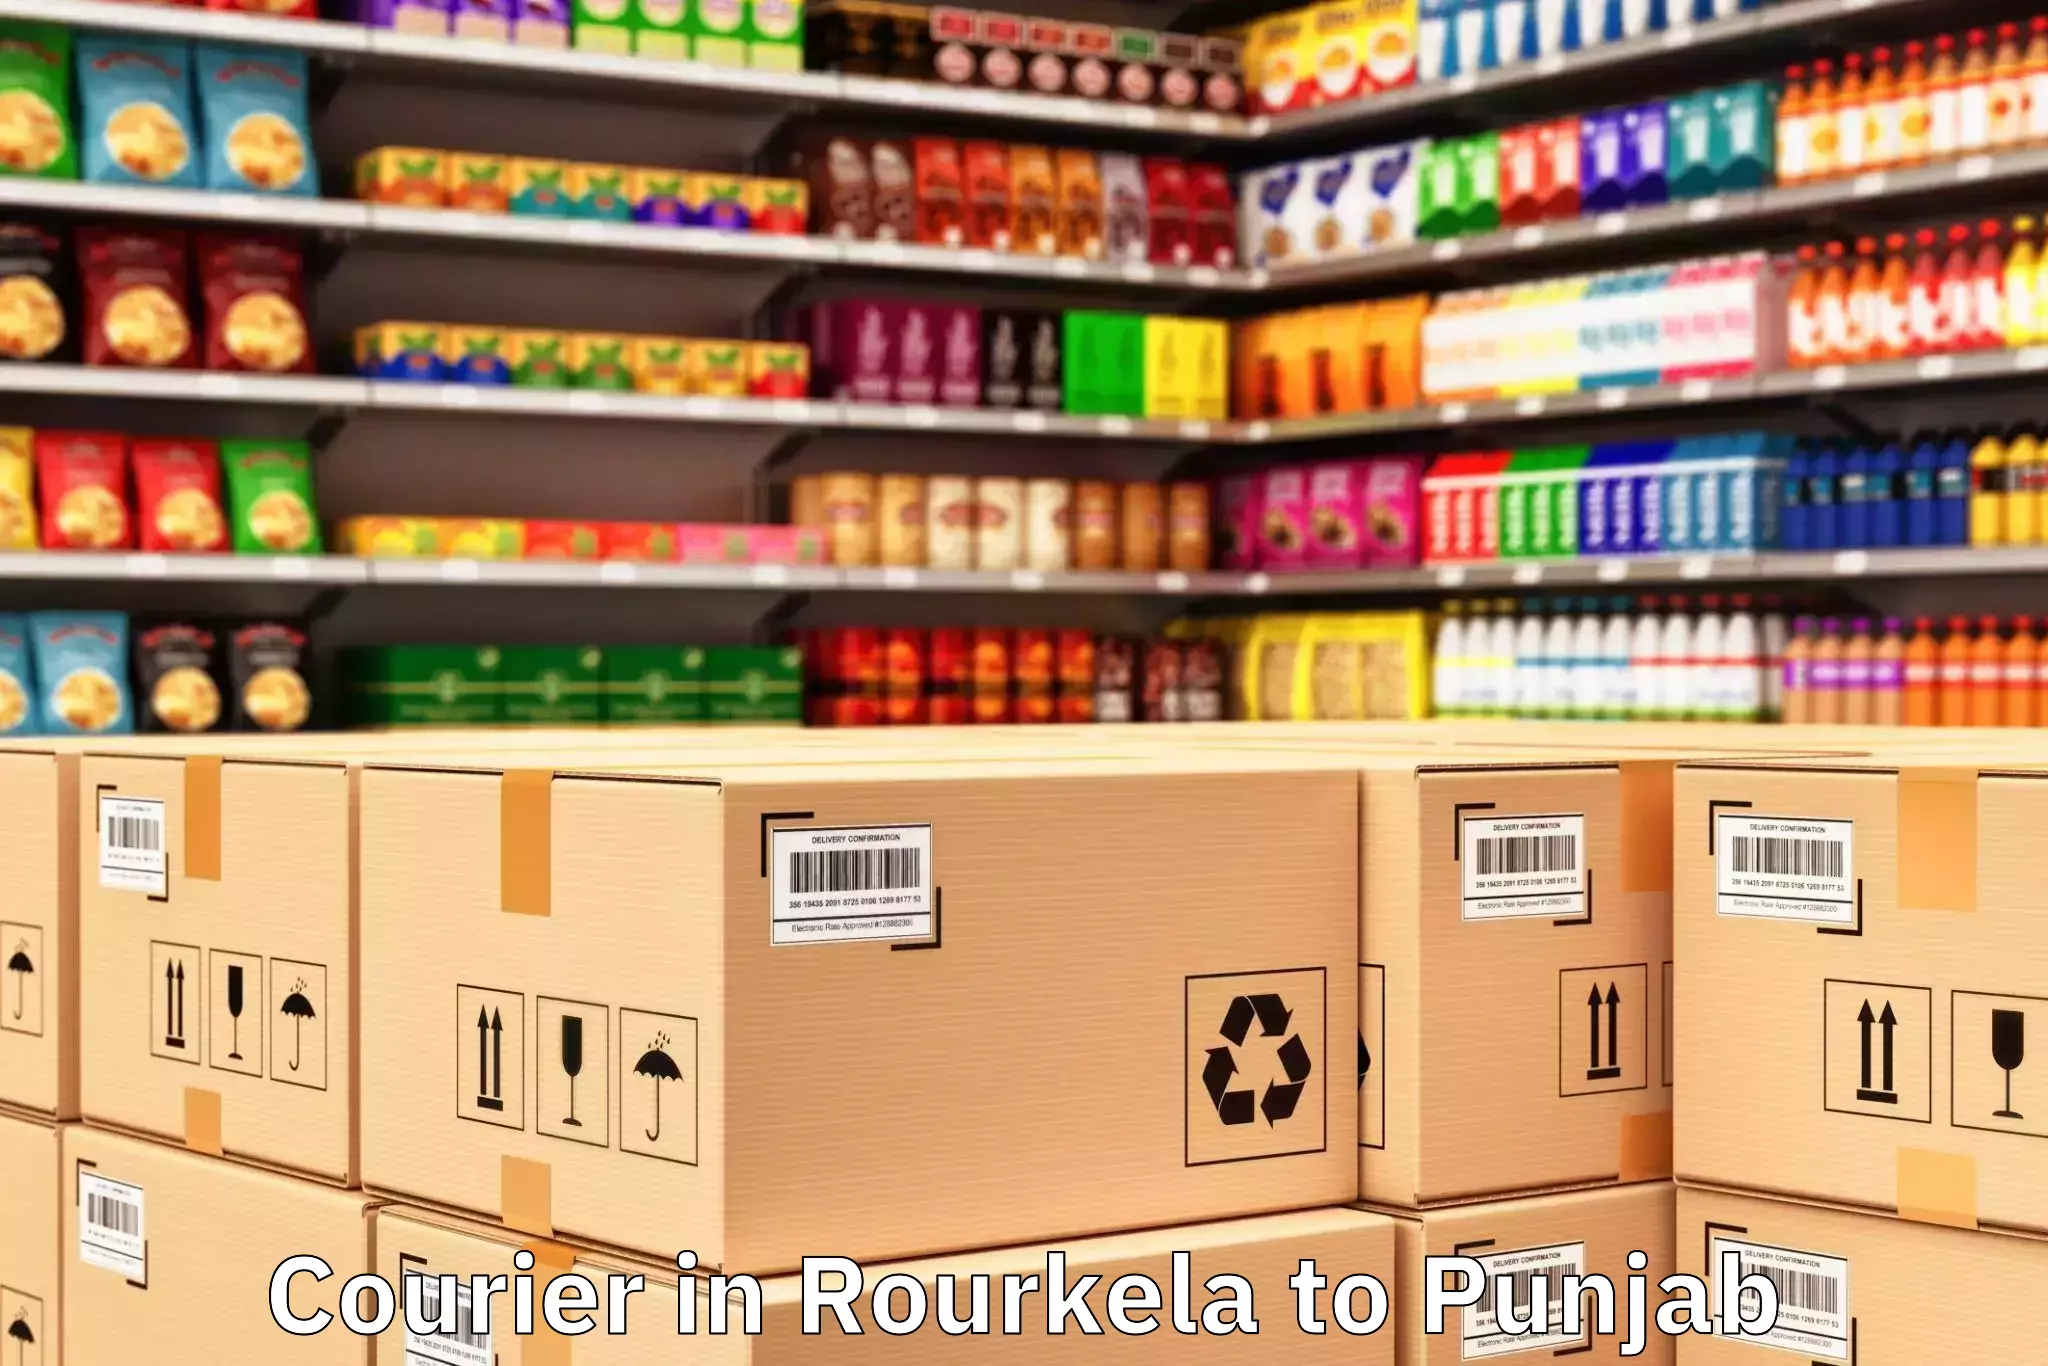 Easy Rourkela to Vr Mall Punjab Courier Booking